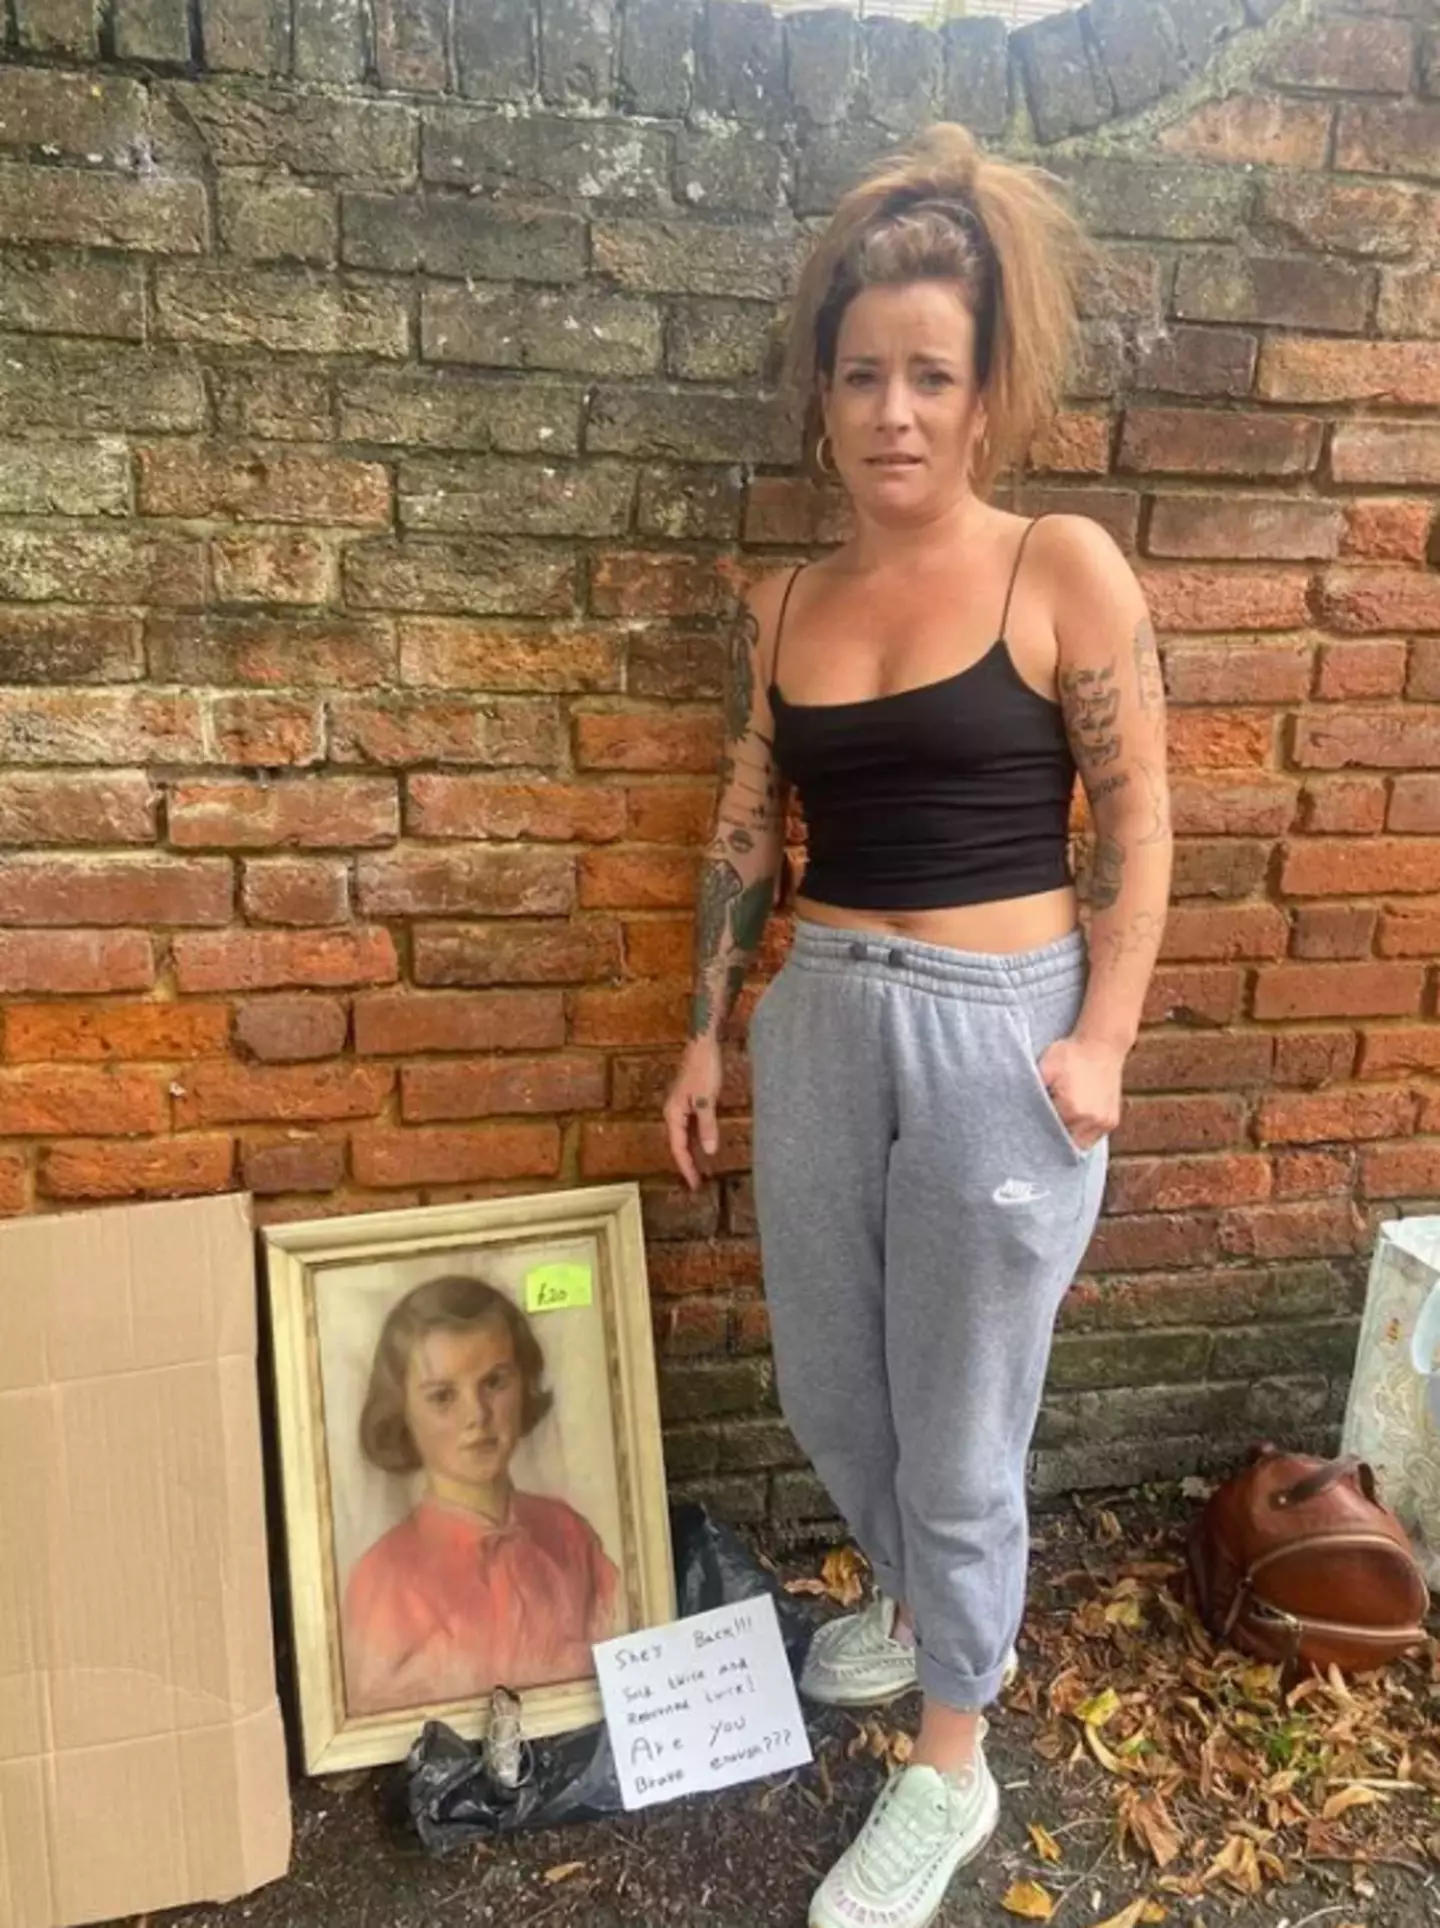 Zoe has bought the 'cursed' painting twice.